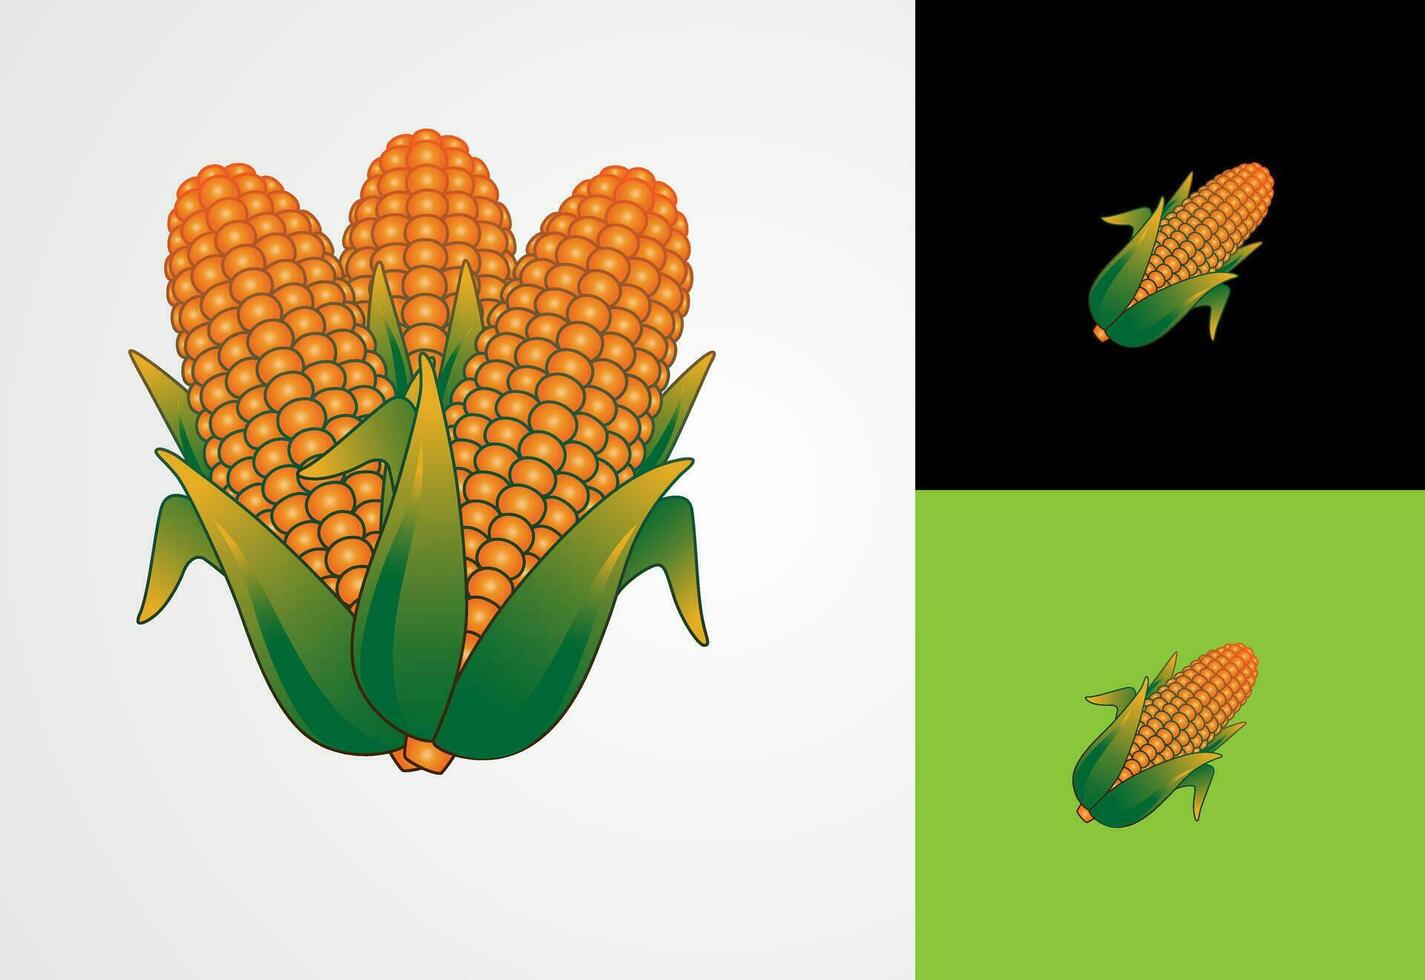 Corn Fruits coloring pages vector illustration Free Vector